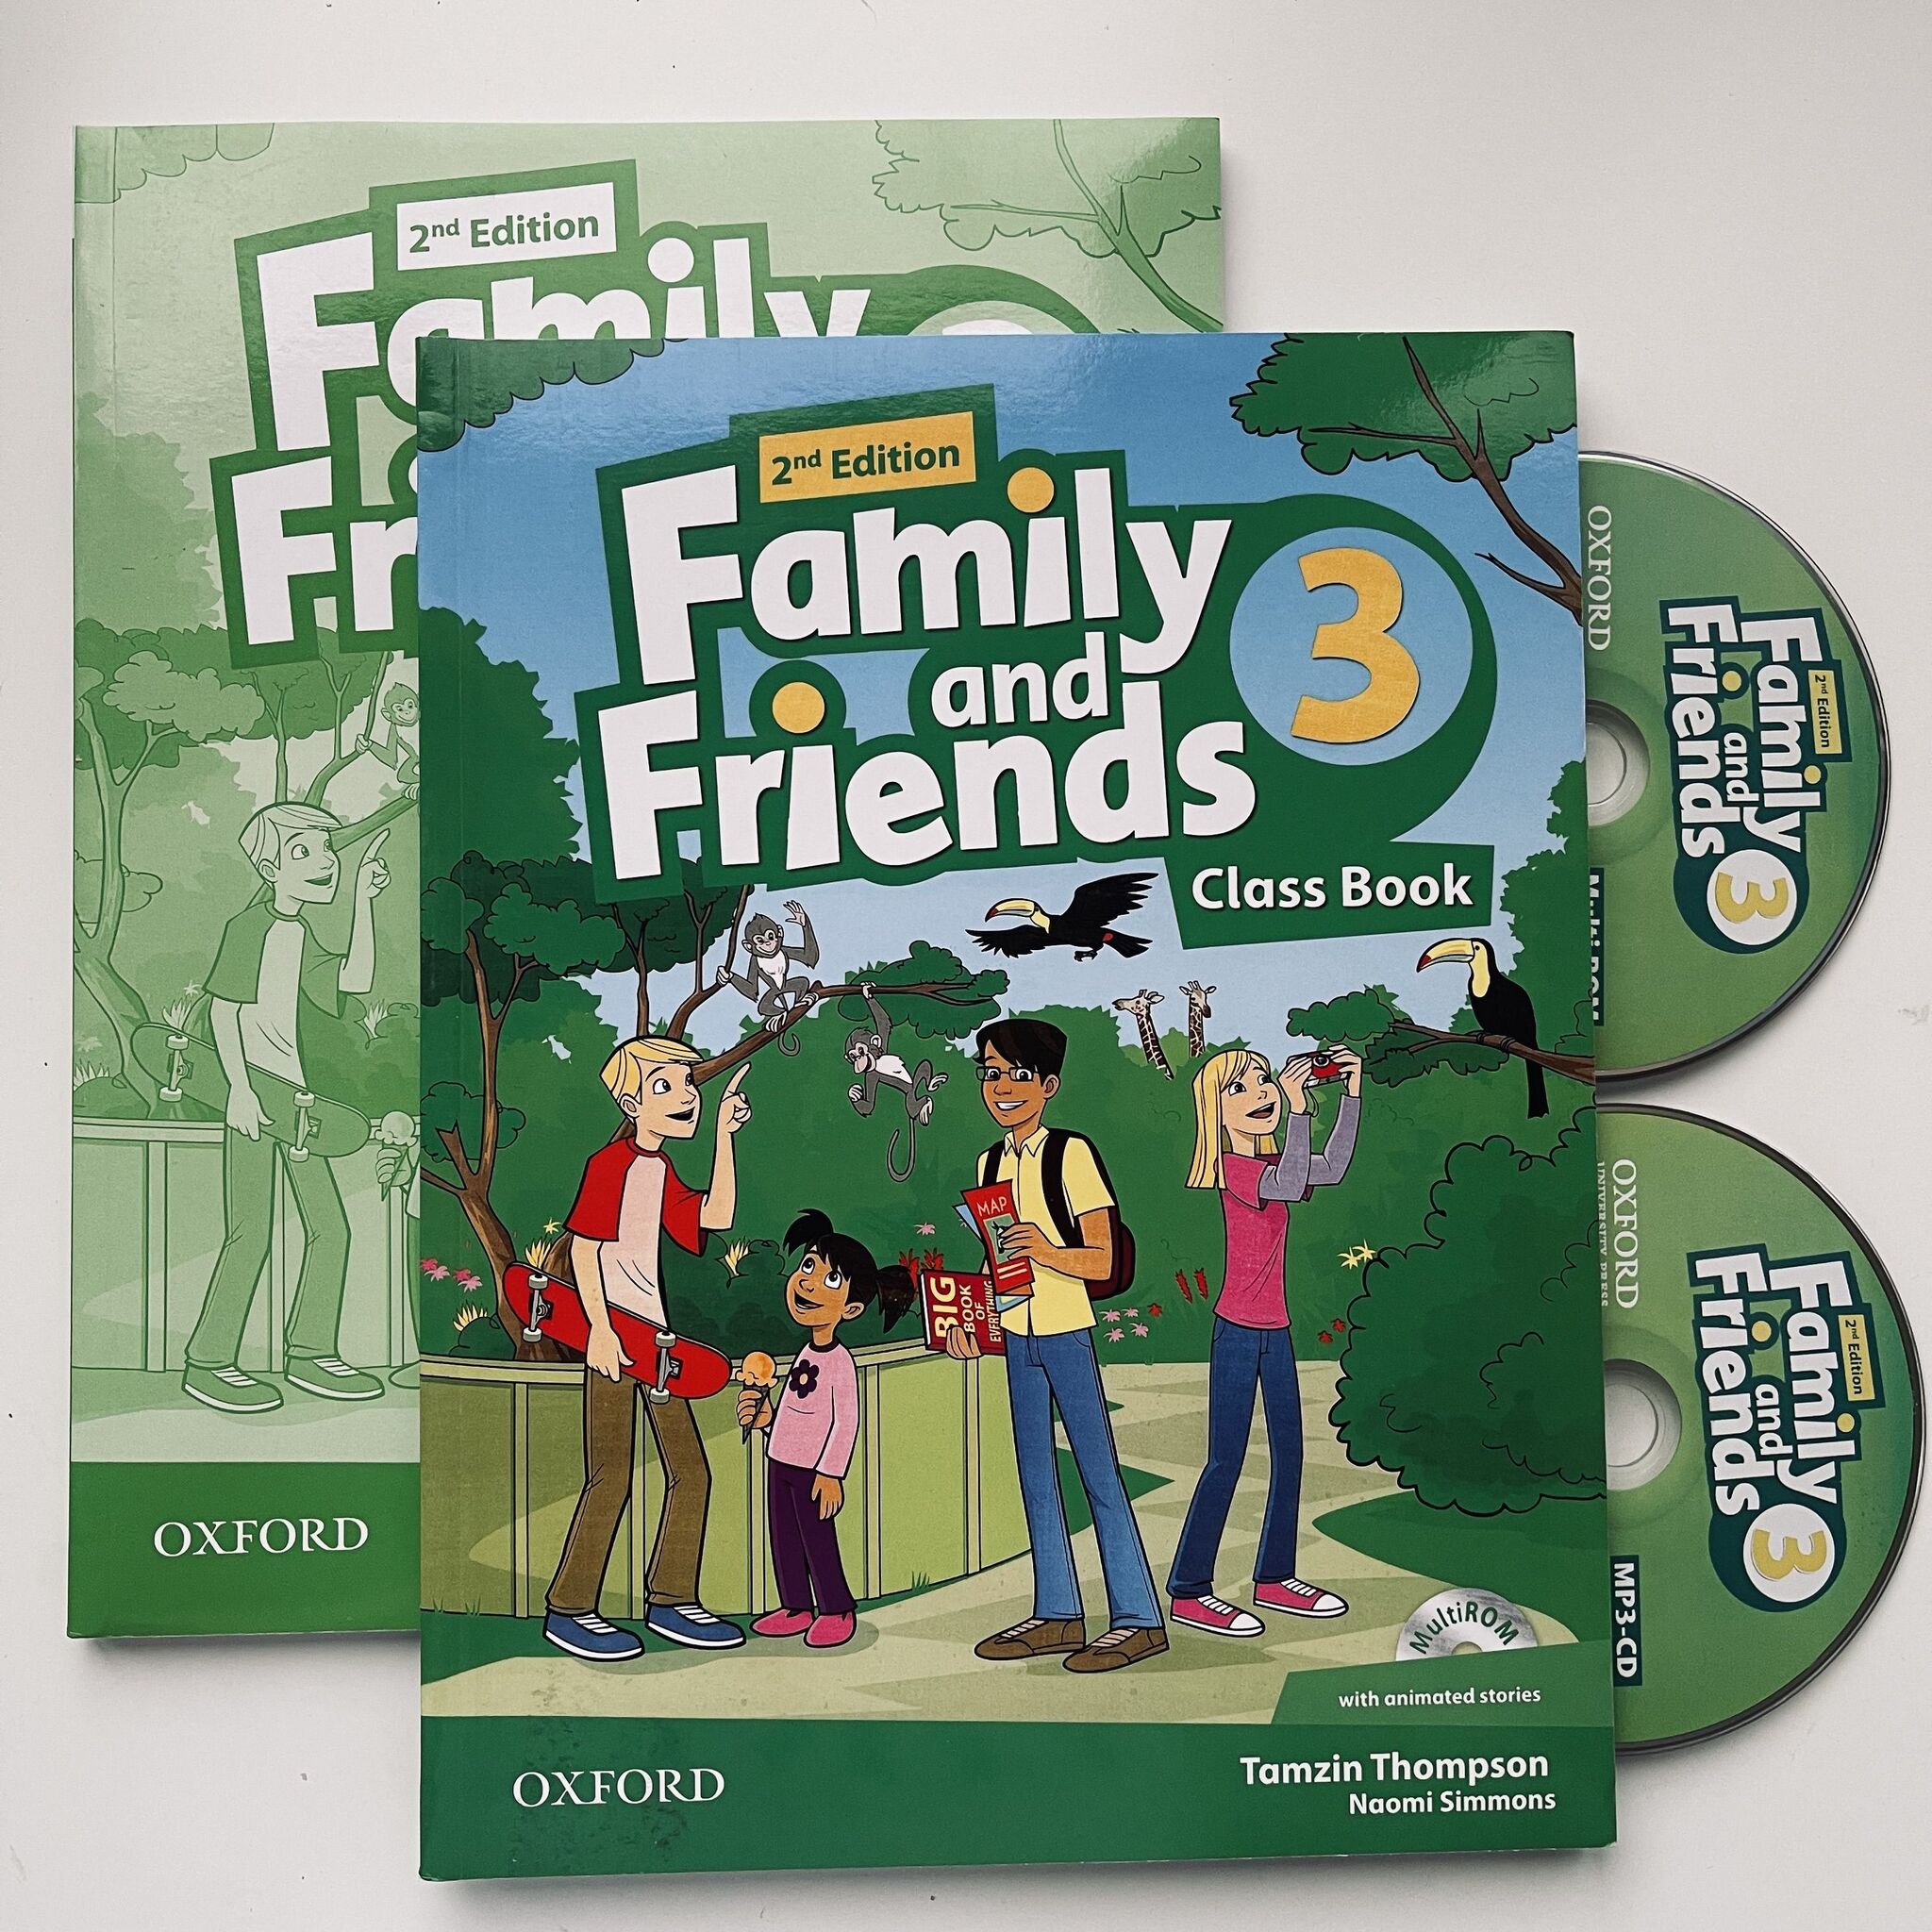 Английский язык friends 3 workbook. Family and friends 3 Workbook Оксфорд Liz Driscoll. 2nd Edition Family friends Workbook Oxford Naomi Simmons. Family and friends 3 рабочая тетрадь. Family and friends 3 class book.